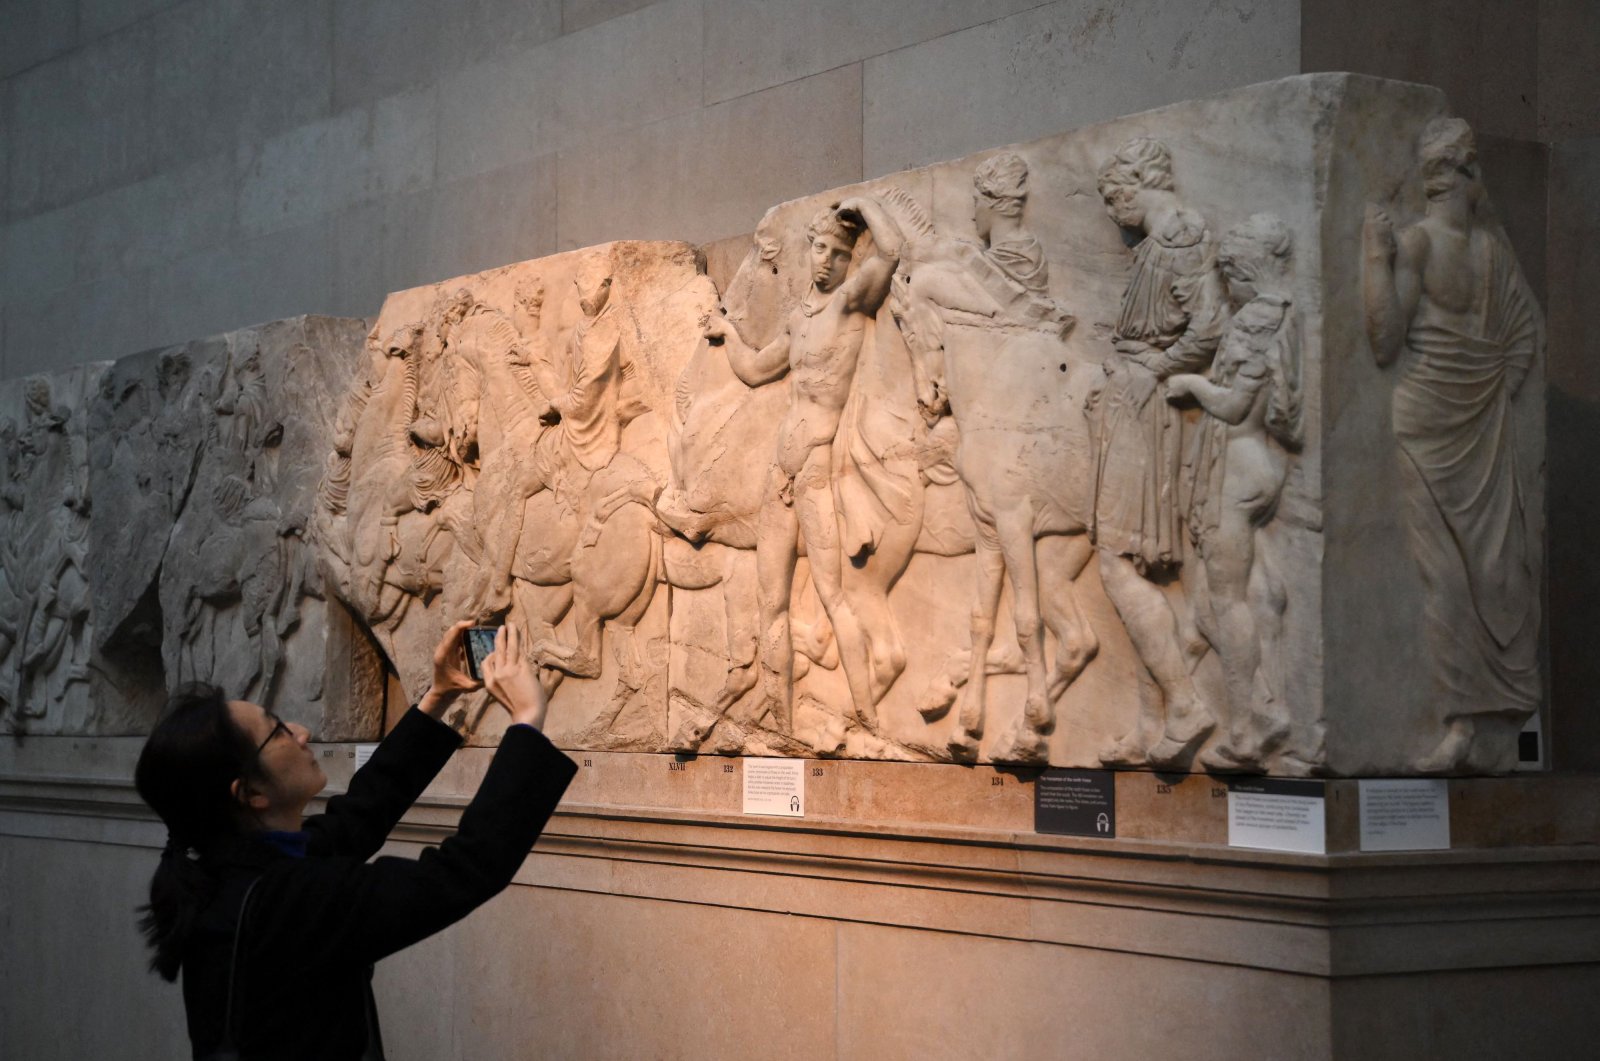 Visitors view the Parthenon Marbles, also known as the Elgin Marbles, at the British Museum in London on Jan. 9, 2023. (AFP Photo)